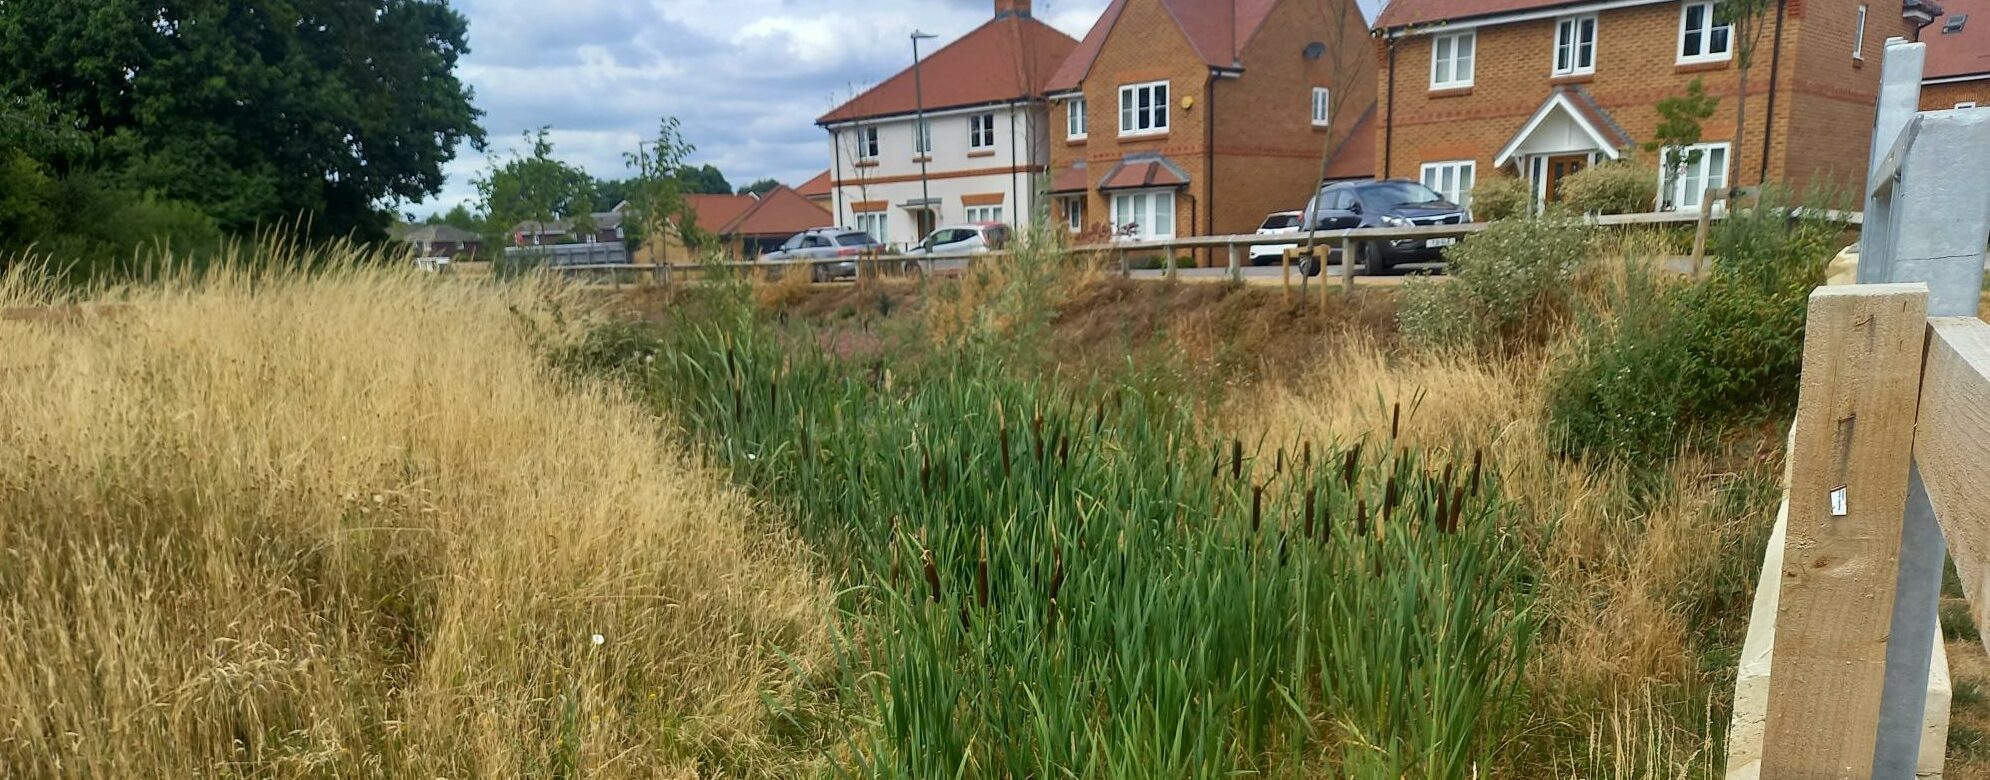 a tall grass and reeds sustainable drainage system in a residential area